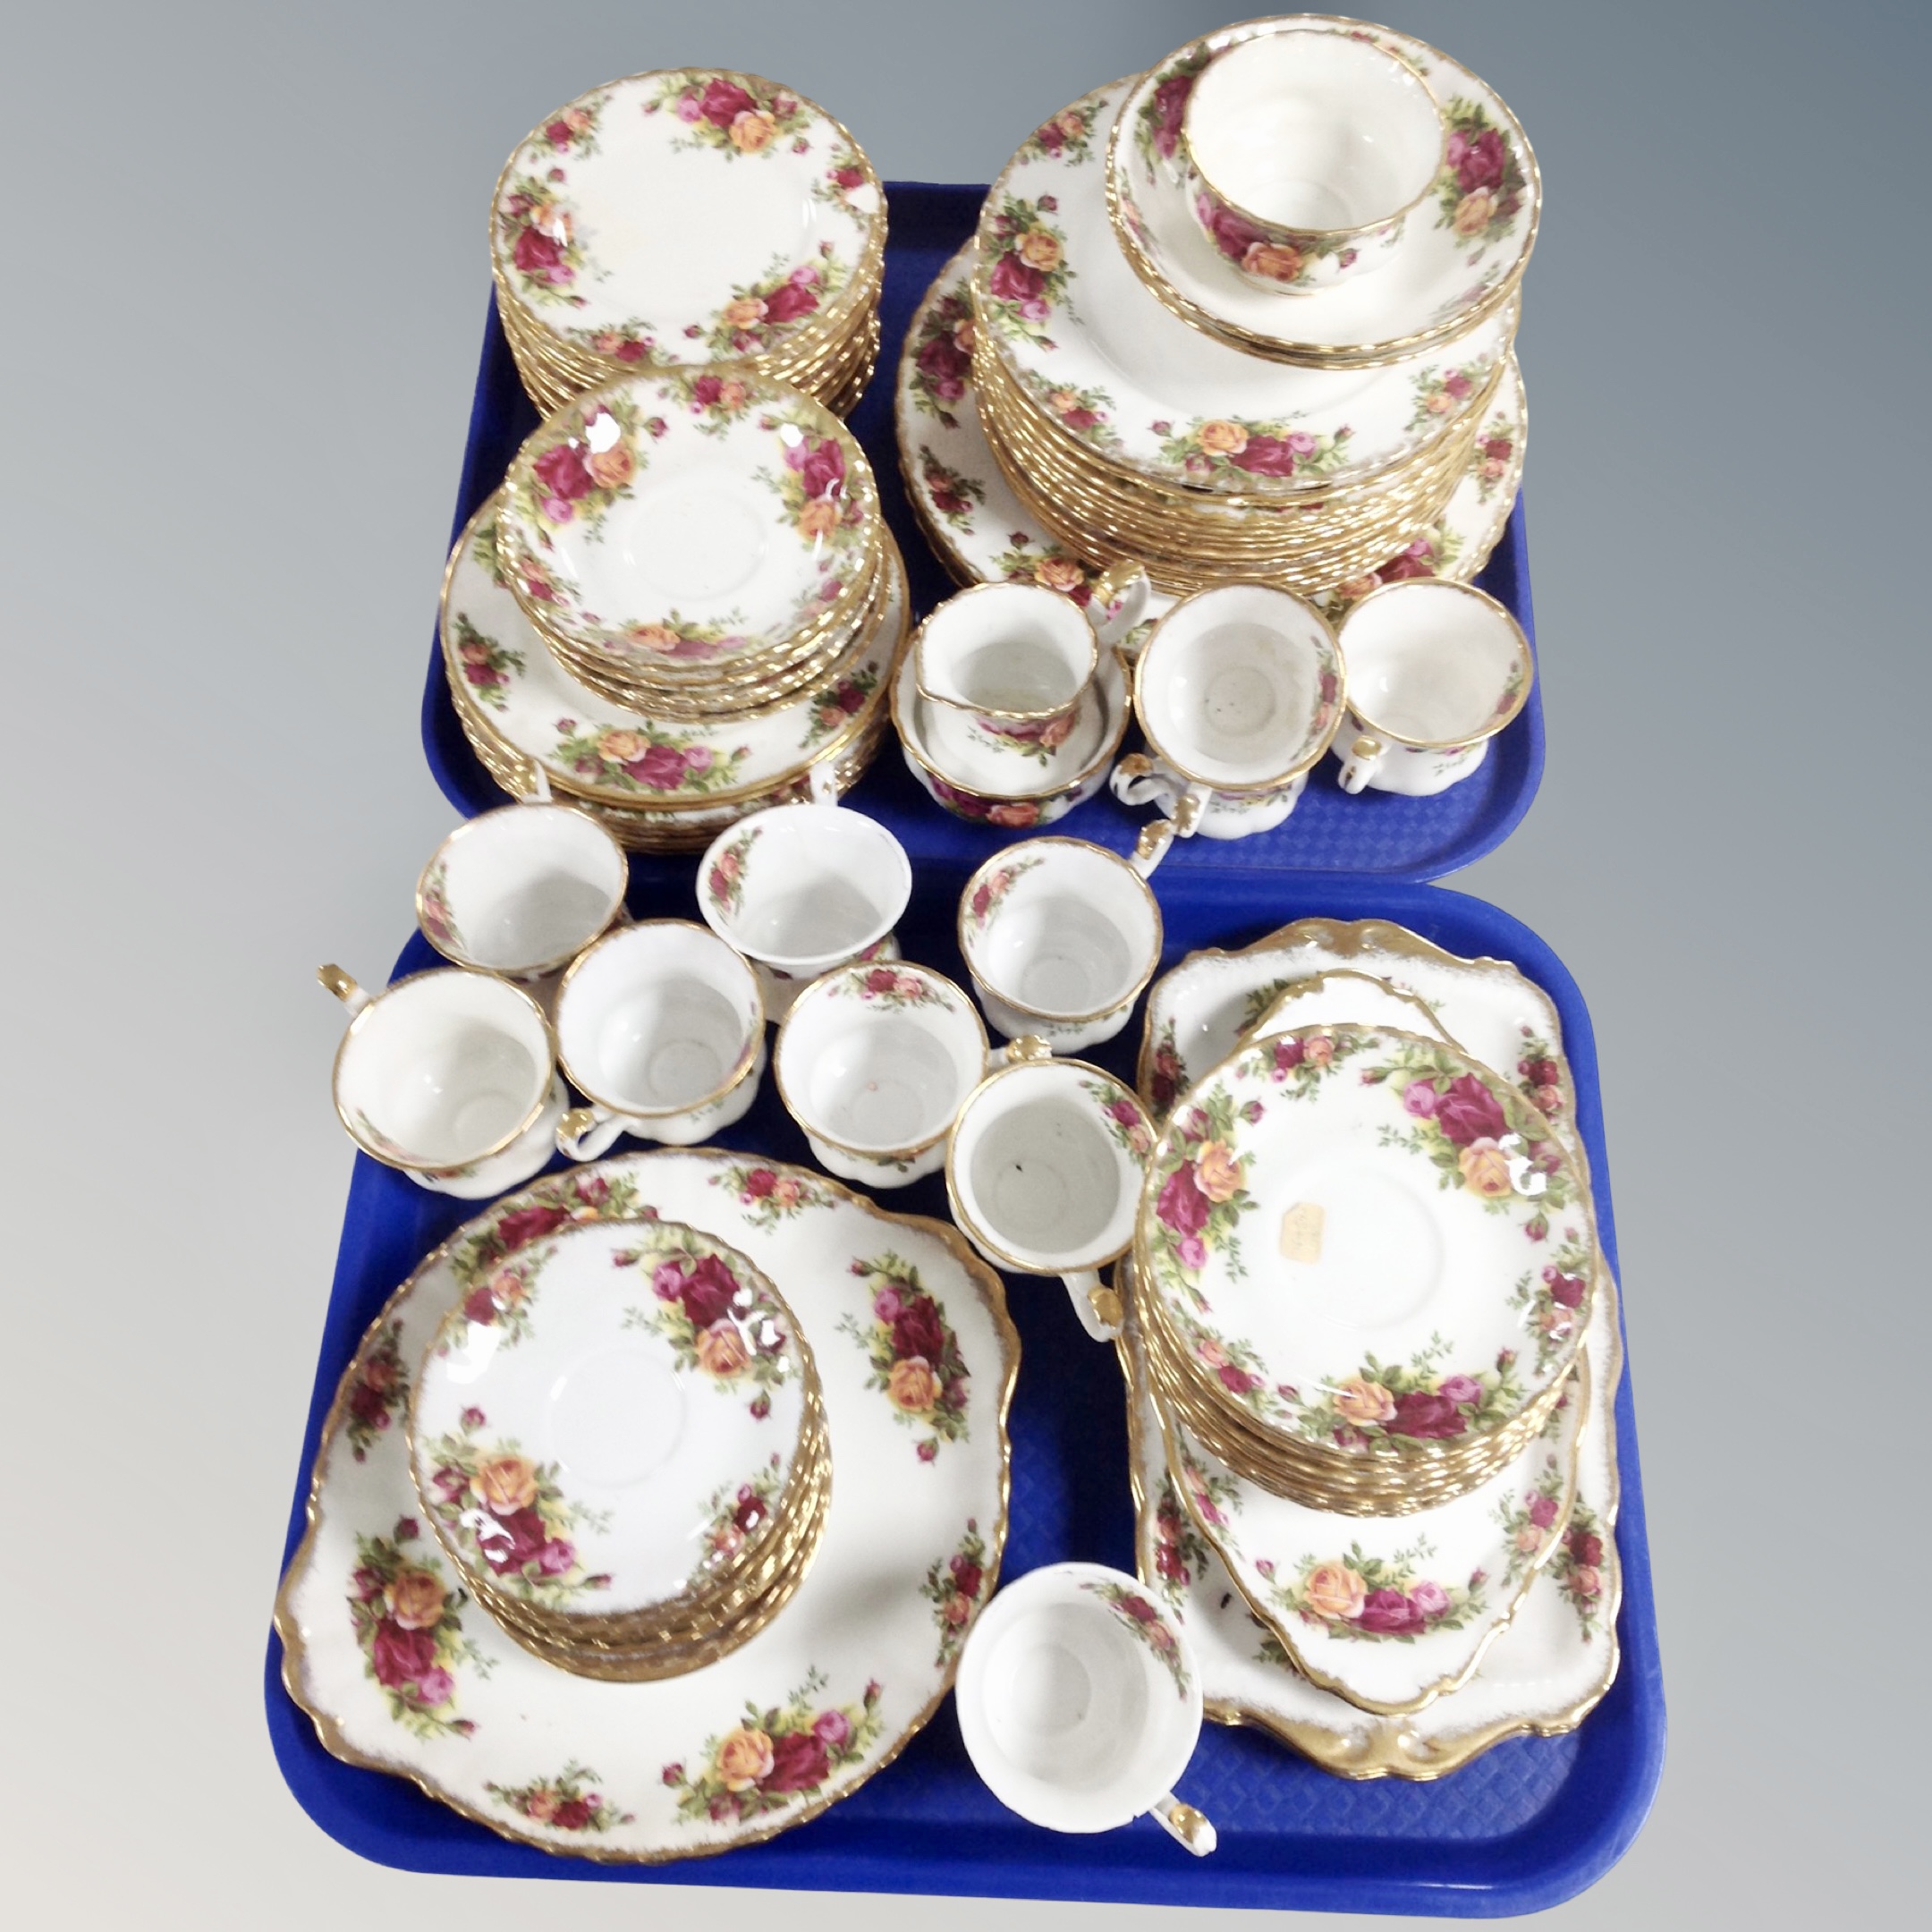 A collection of 77 pieces of Royal Albert Old Country Roses tea and dinner china.